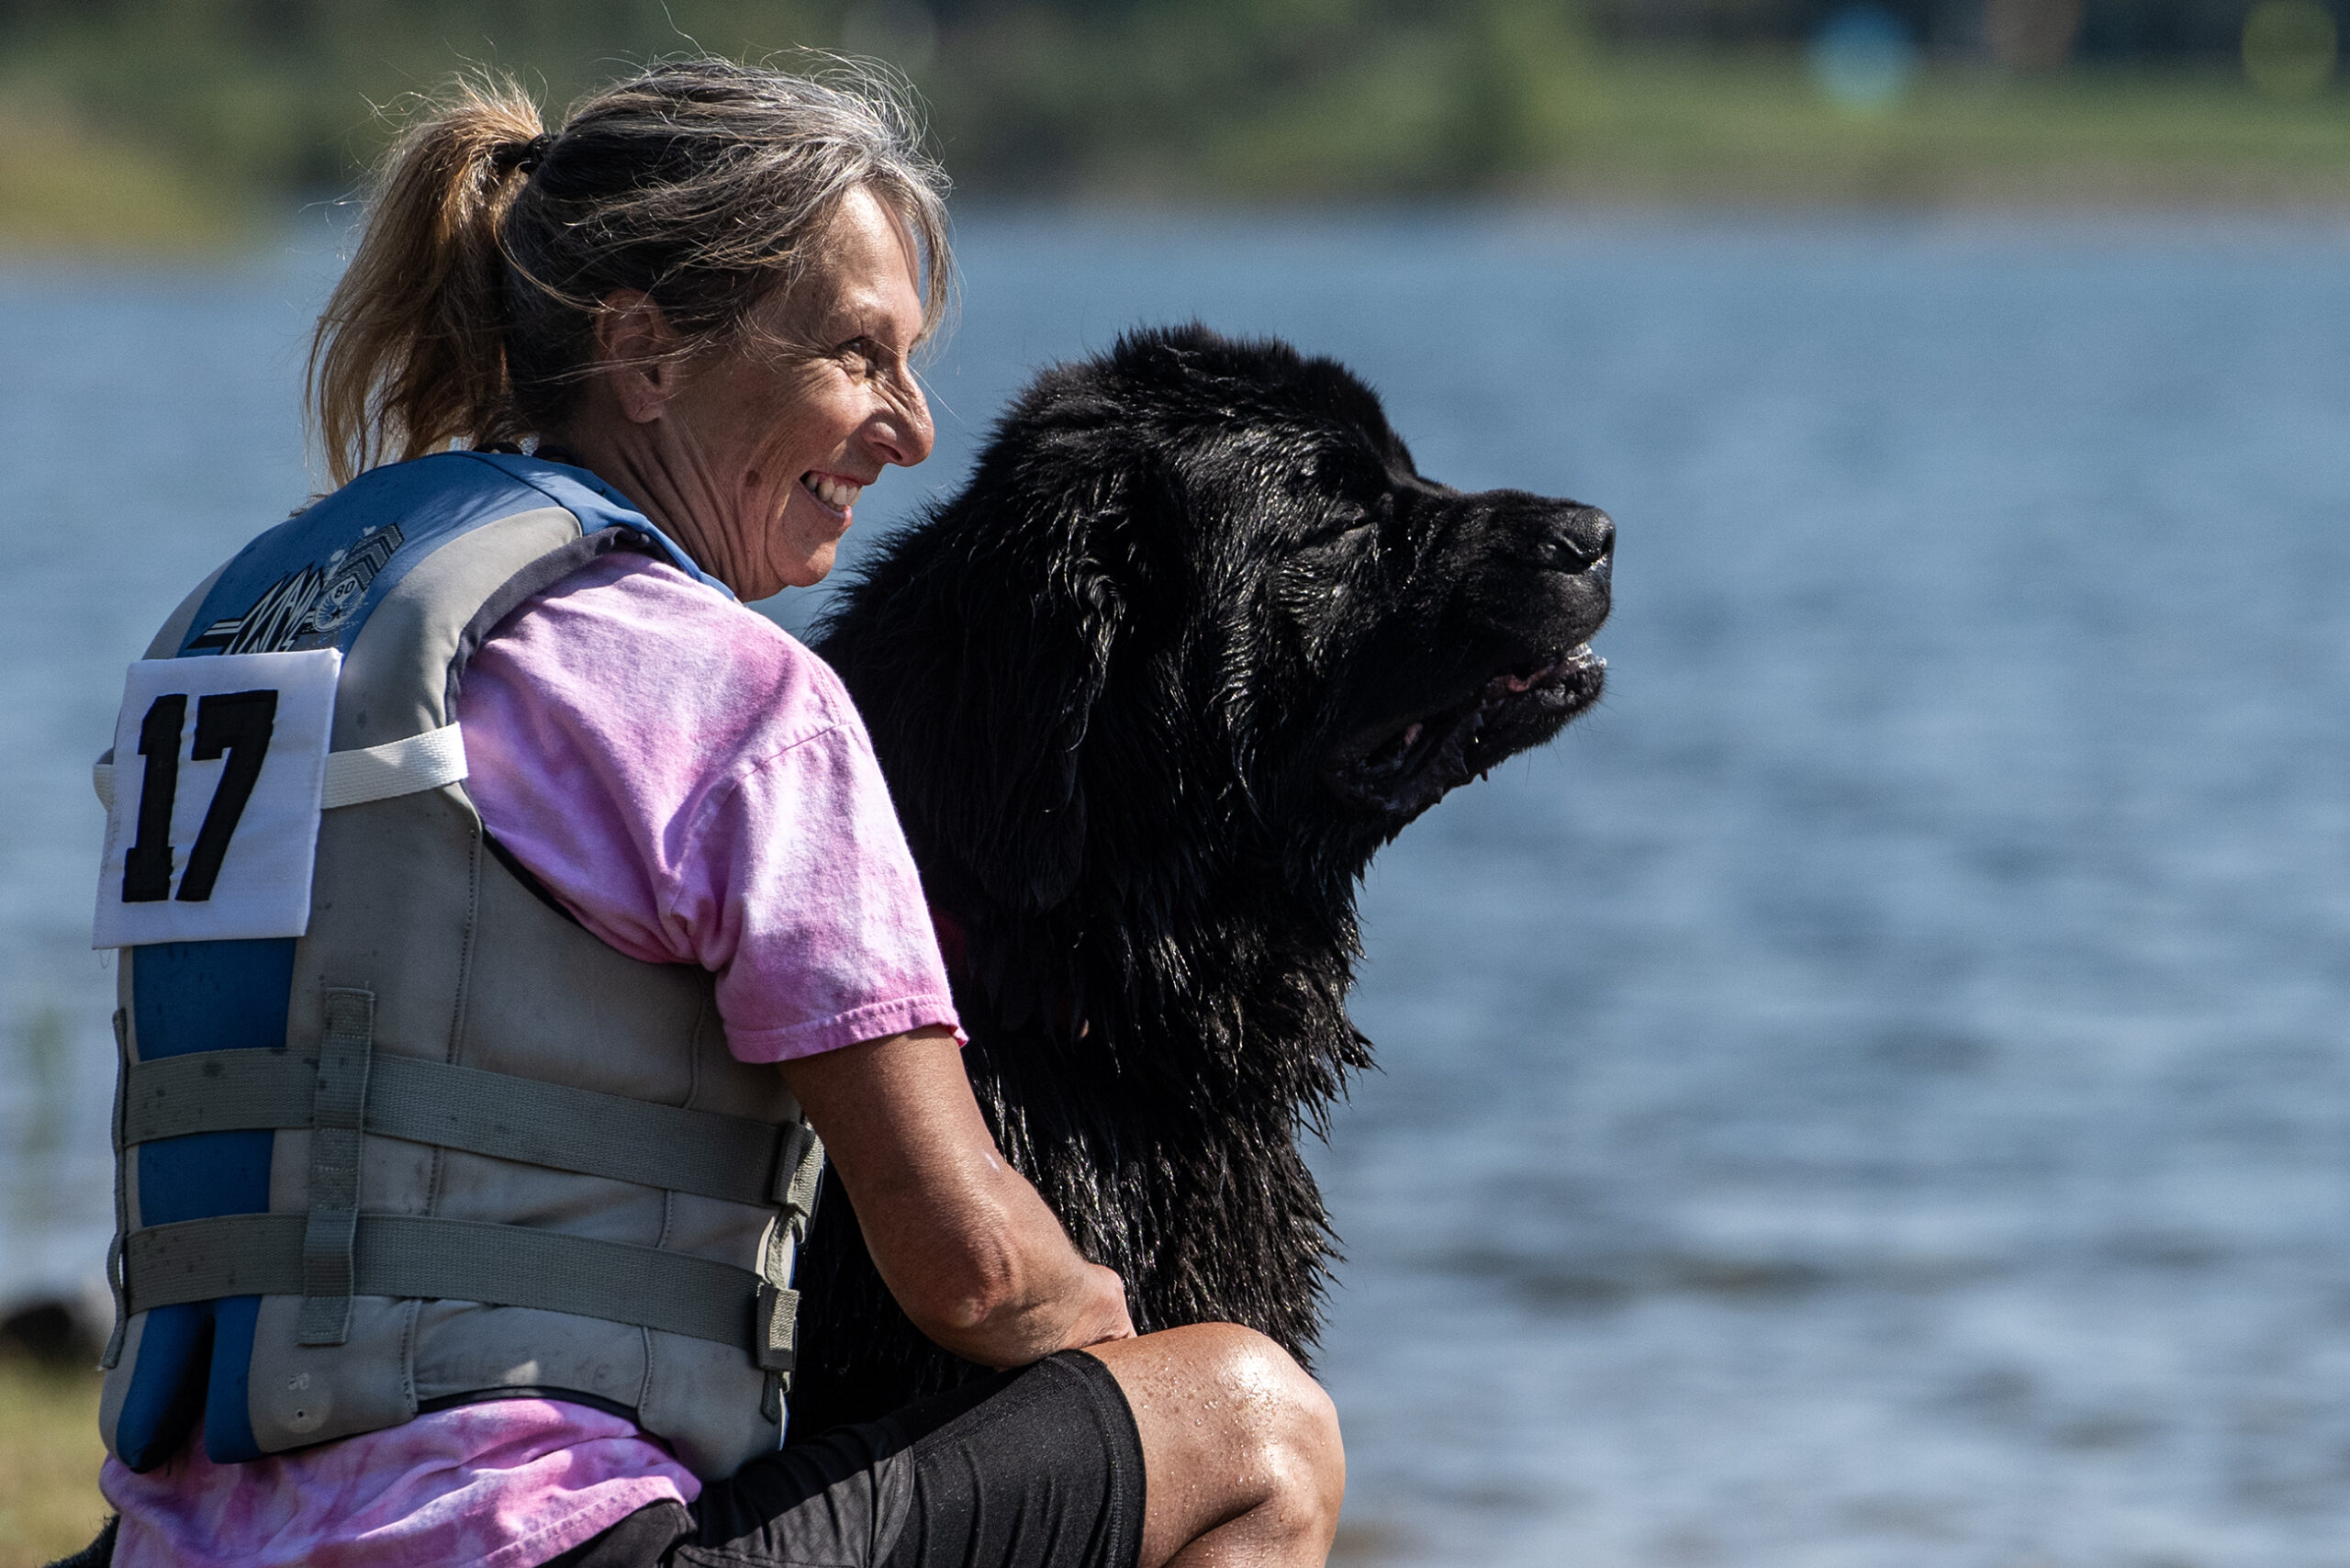 A large black dog and a woman sit next to each other.